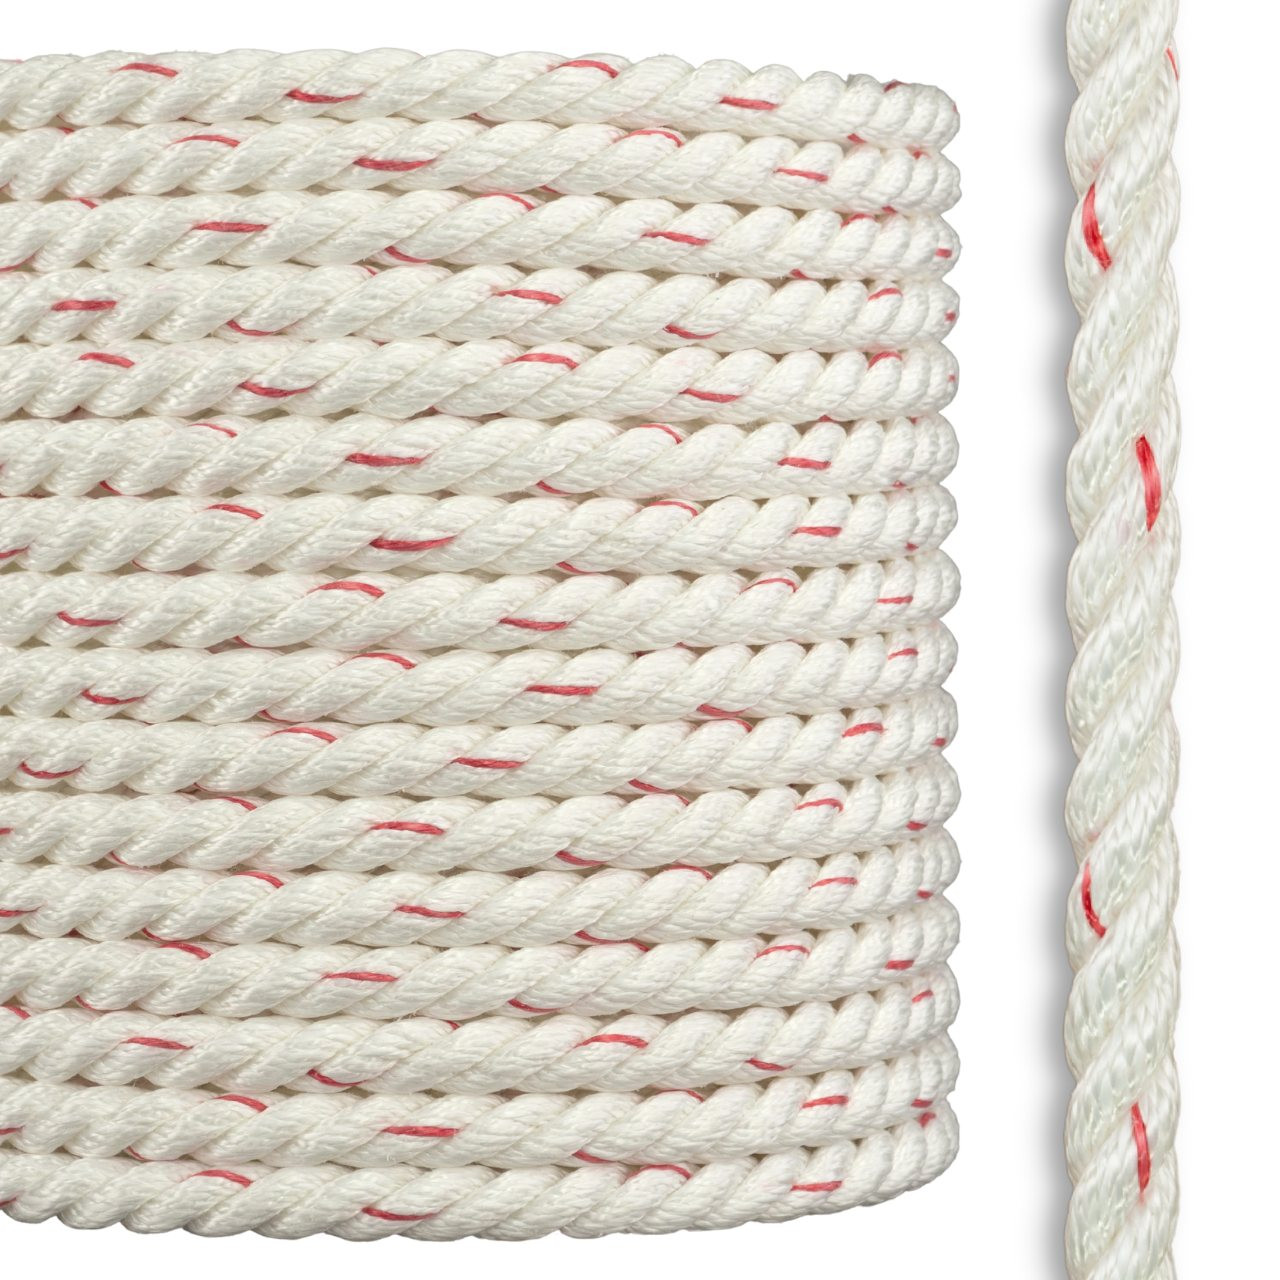 100 % Cotton 3 Strand Rope 1/4'' (per foot) - Chirp N Dales Pet Supply